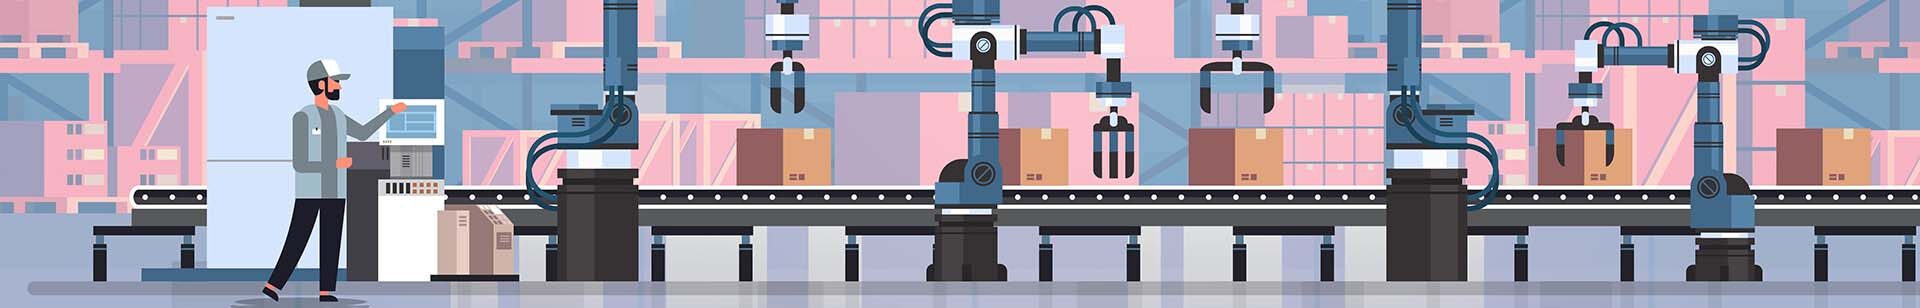 an illustration of an engineer controlling conveyor belt line through robotic hands in a factory. automation production in the manufacturing process